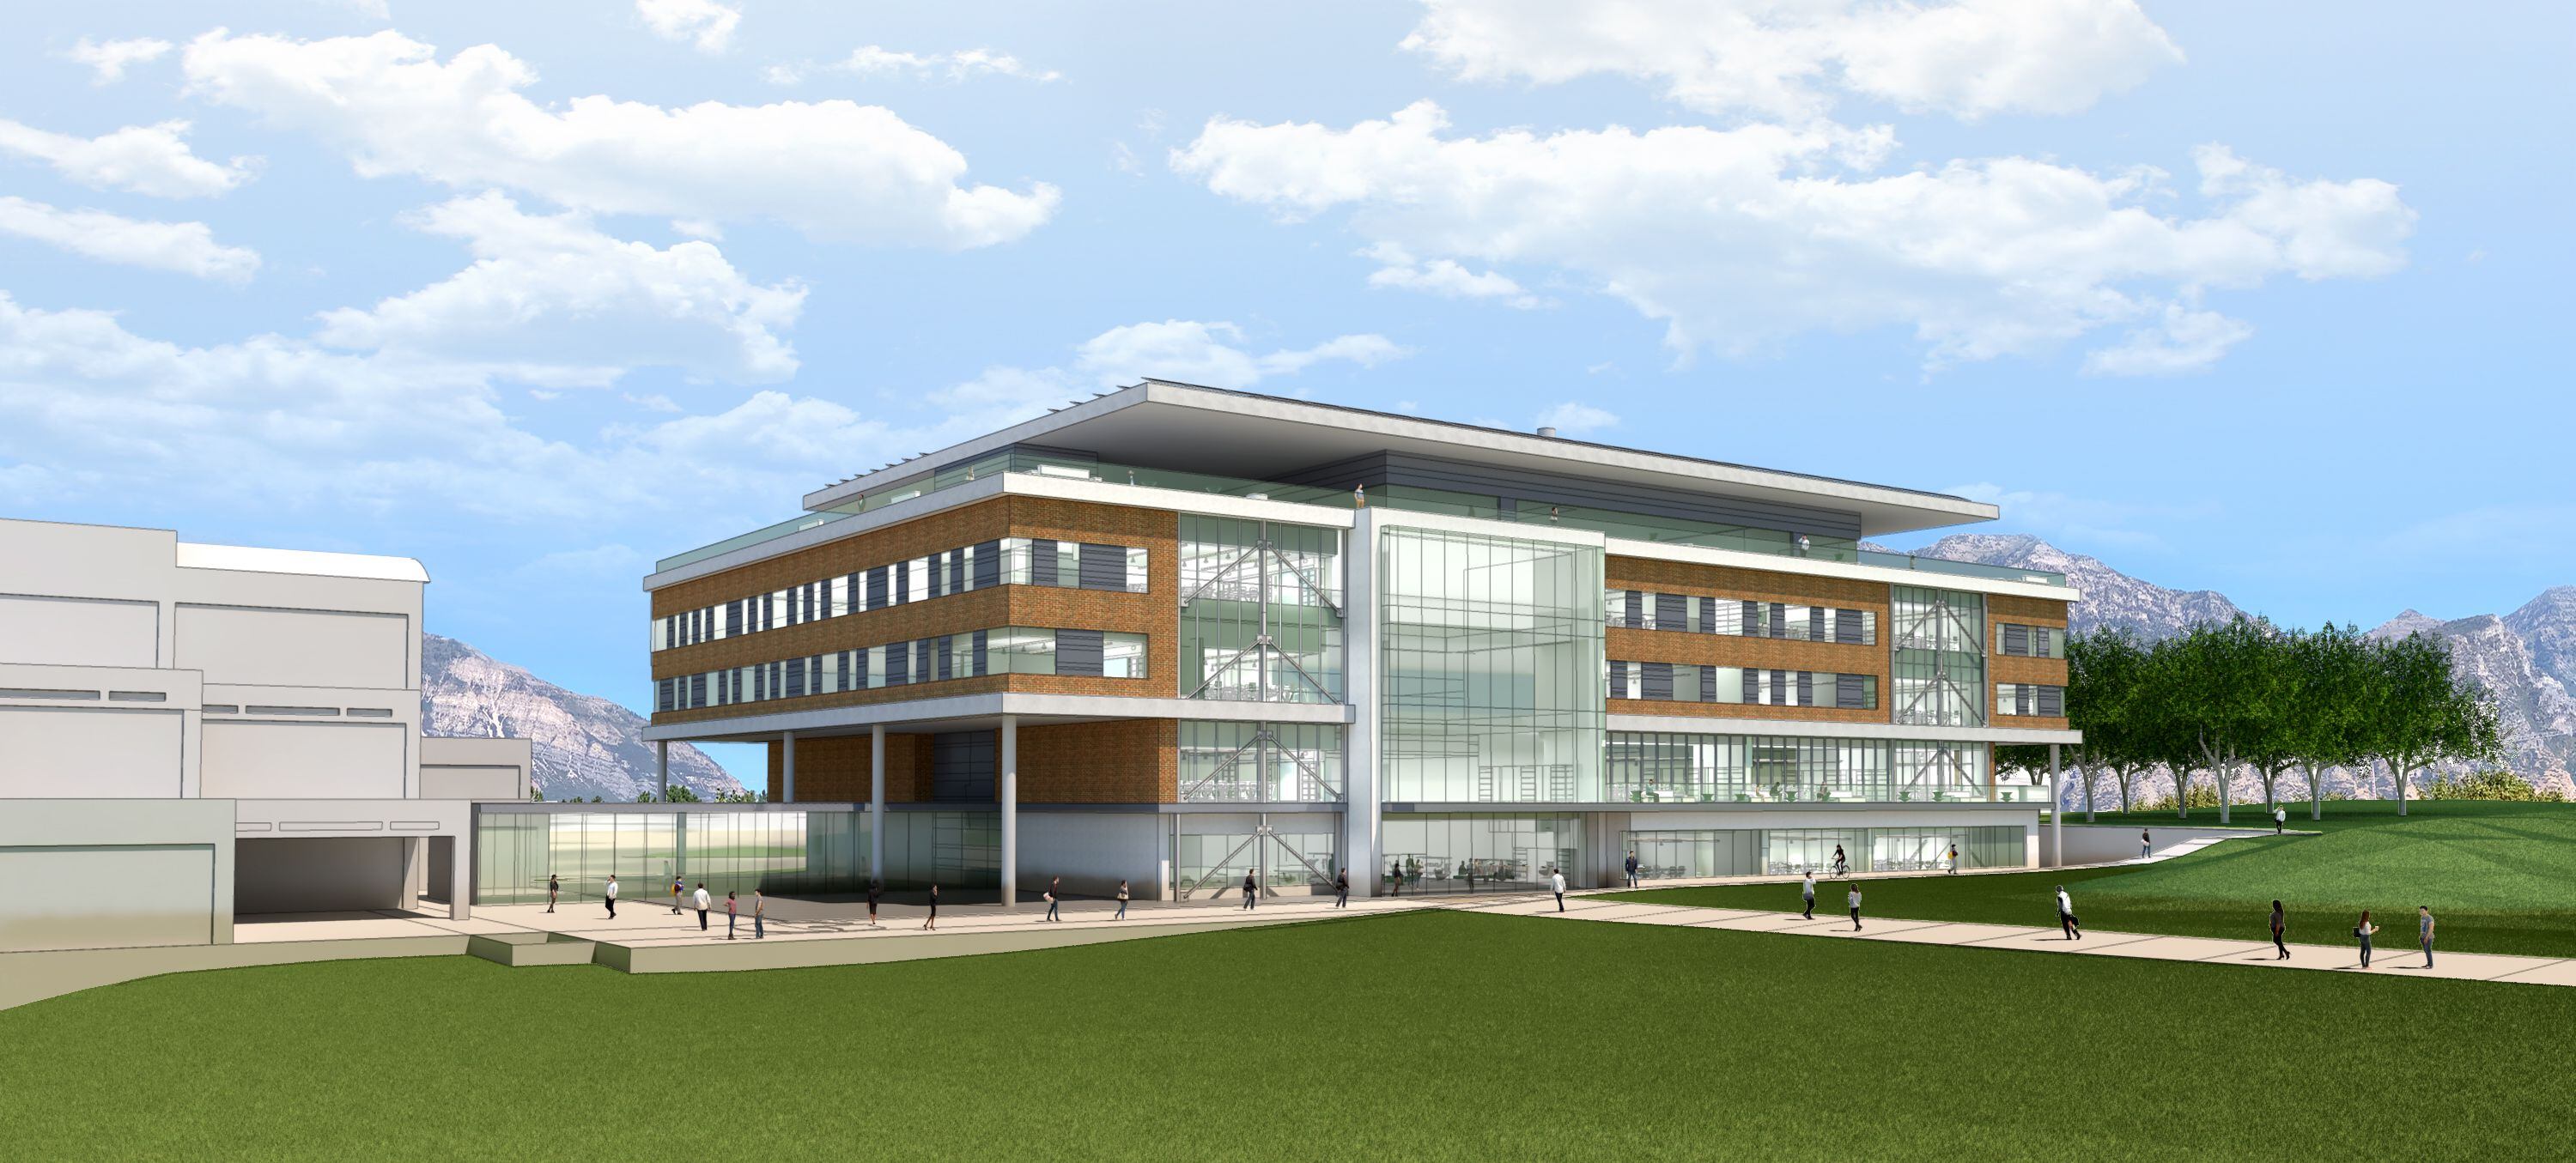 (Utah Valley University) An initial rendering of the new engineering building that will come to Utah Valley University, with construction expected to be done by fall 2025. Supporters of the Utah Innovation Lab say it will provide seed money for startups at all of Utah's public universities.